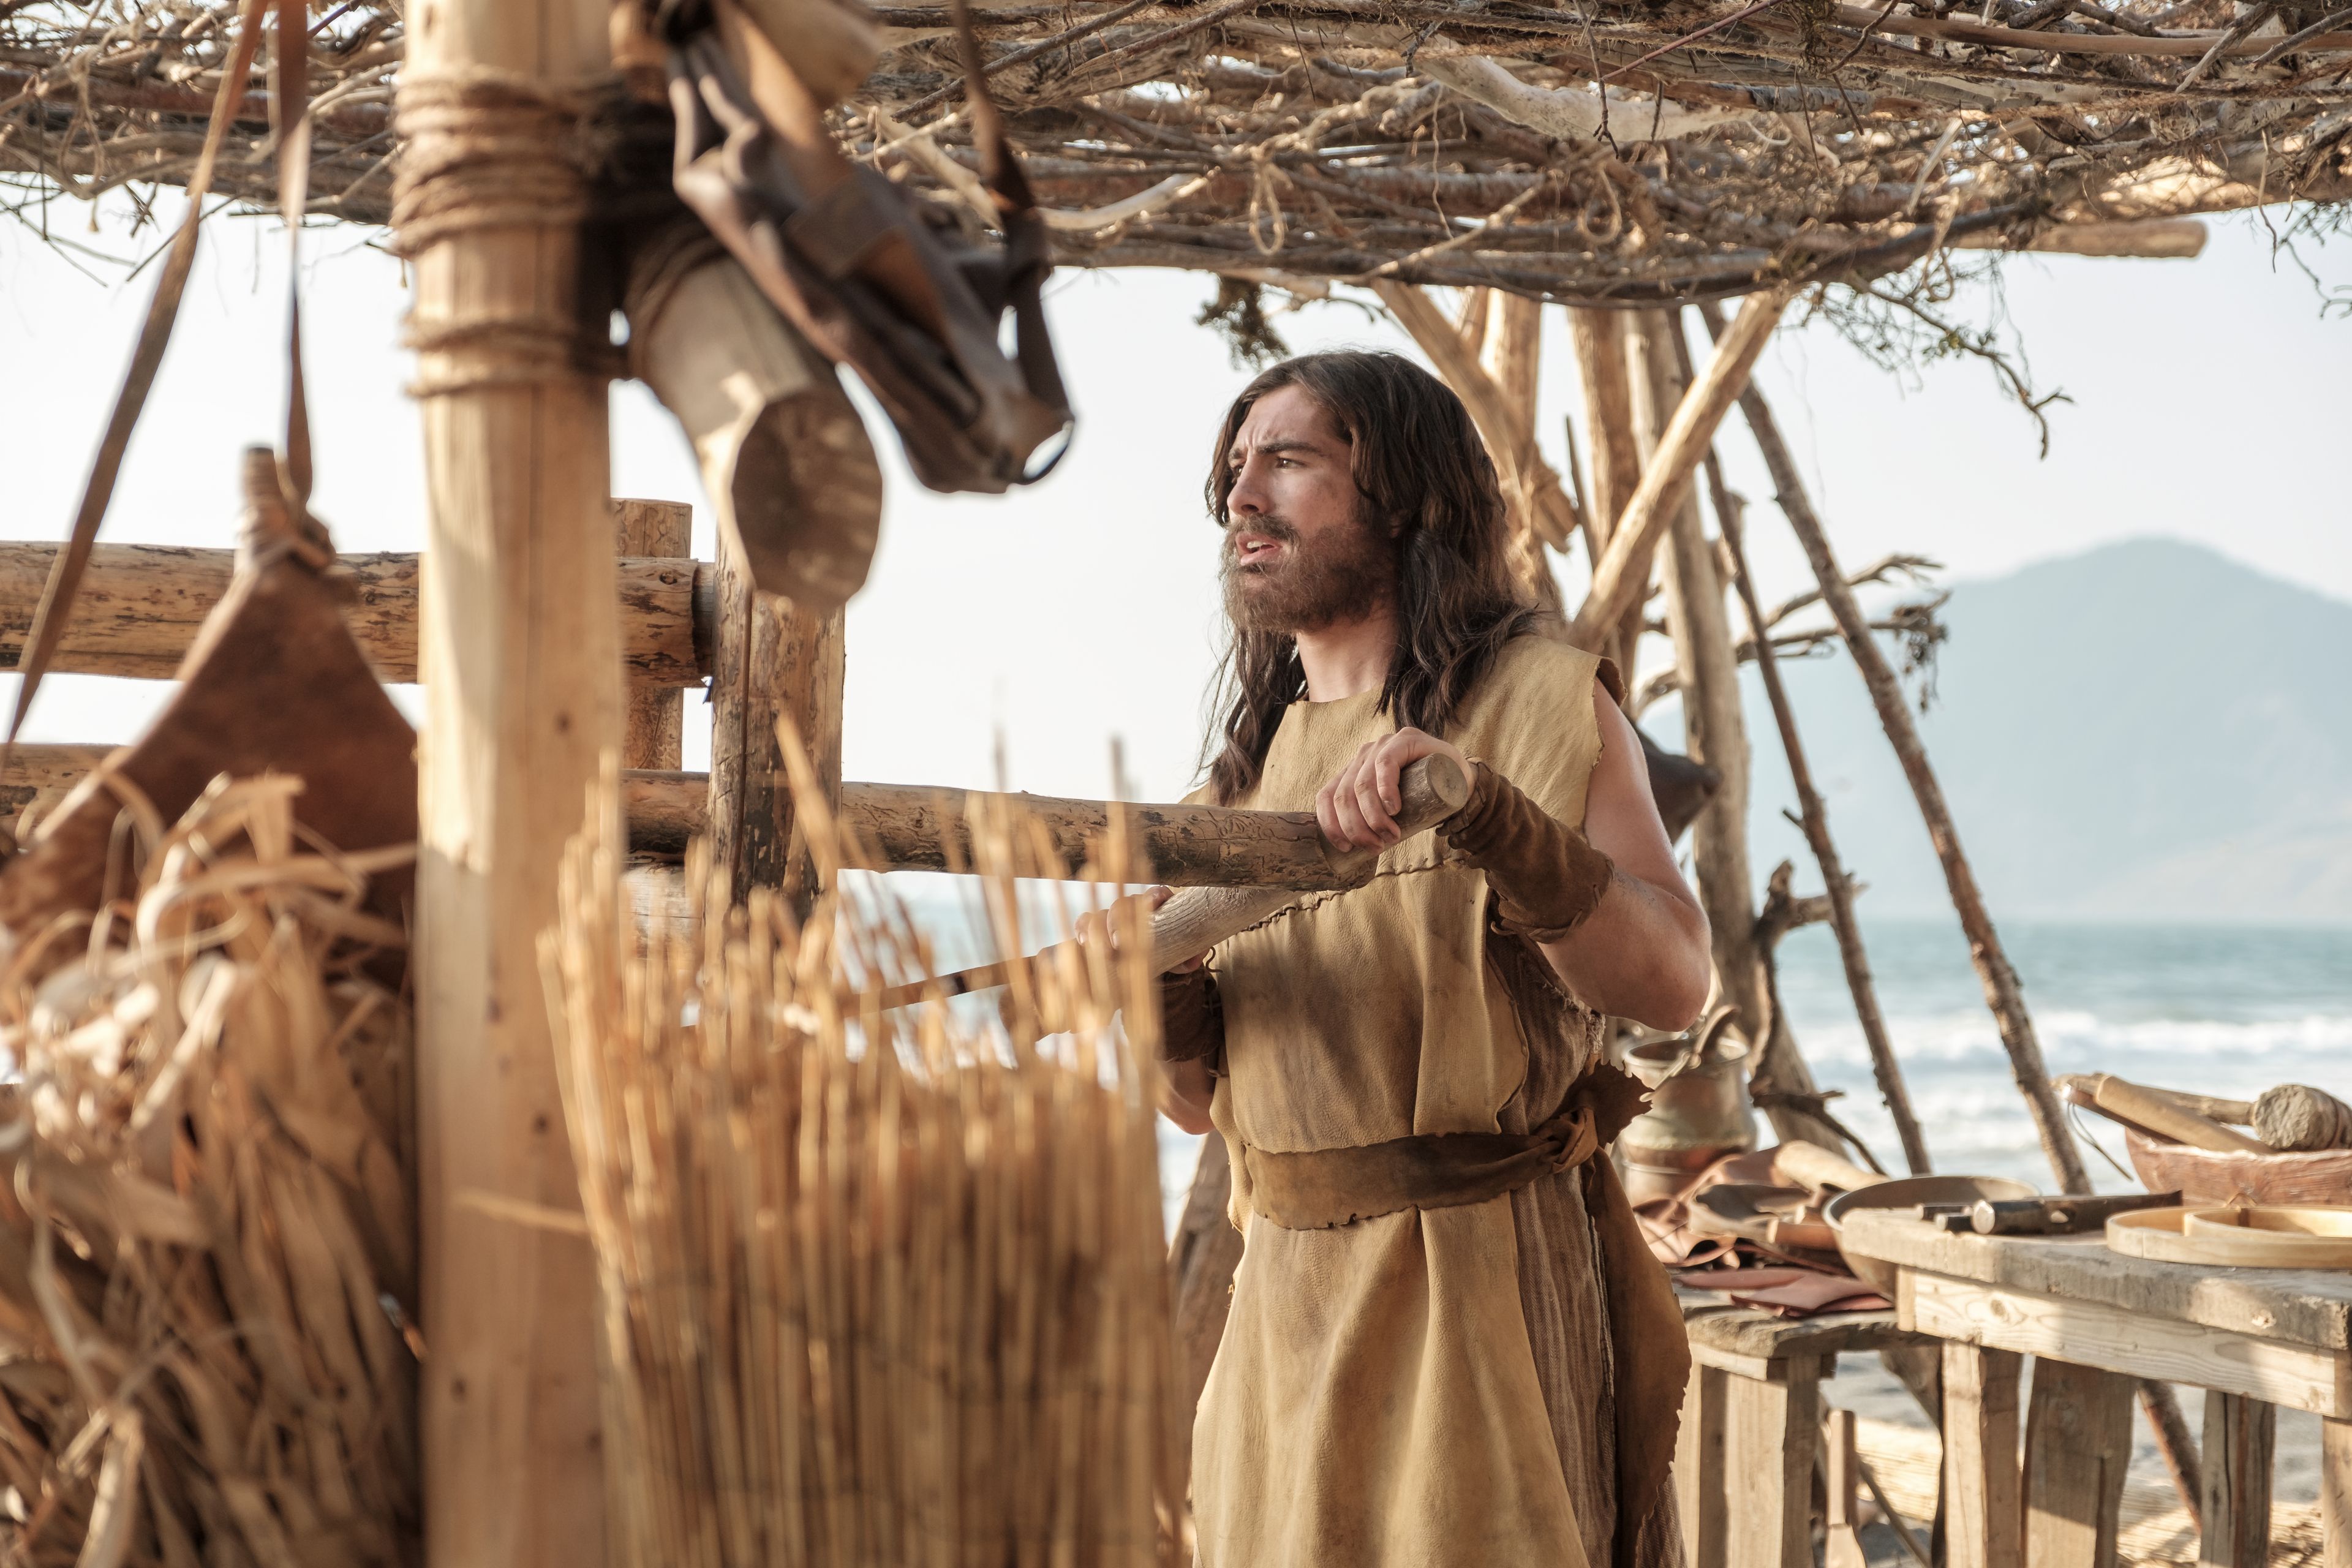 Nephi builds the ship in the land Bountiful.